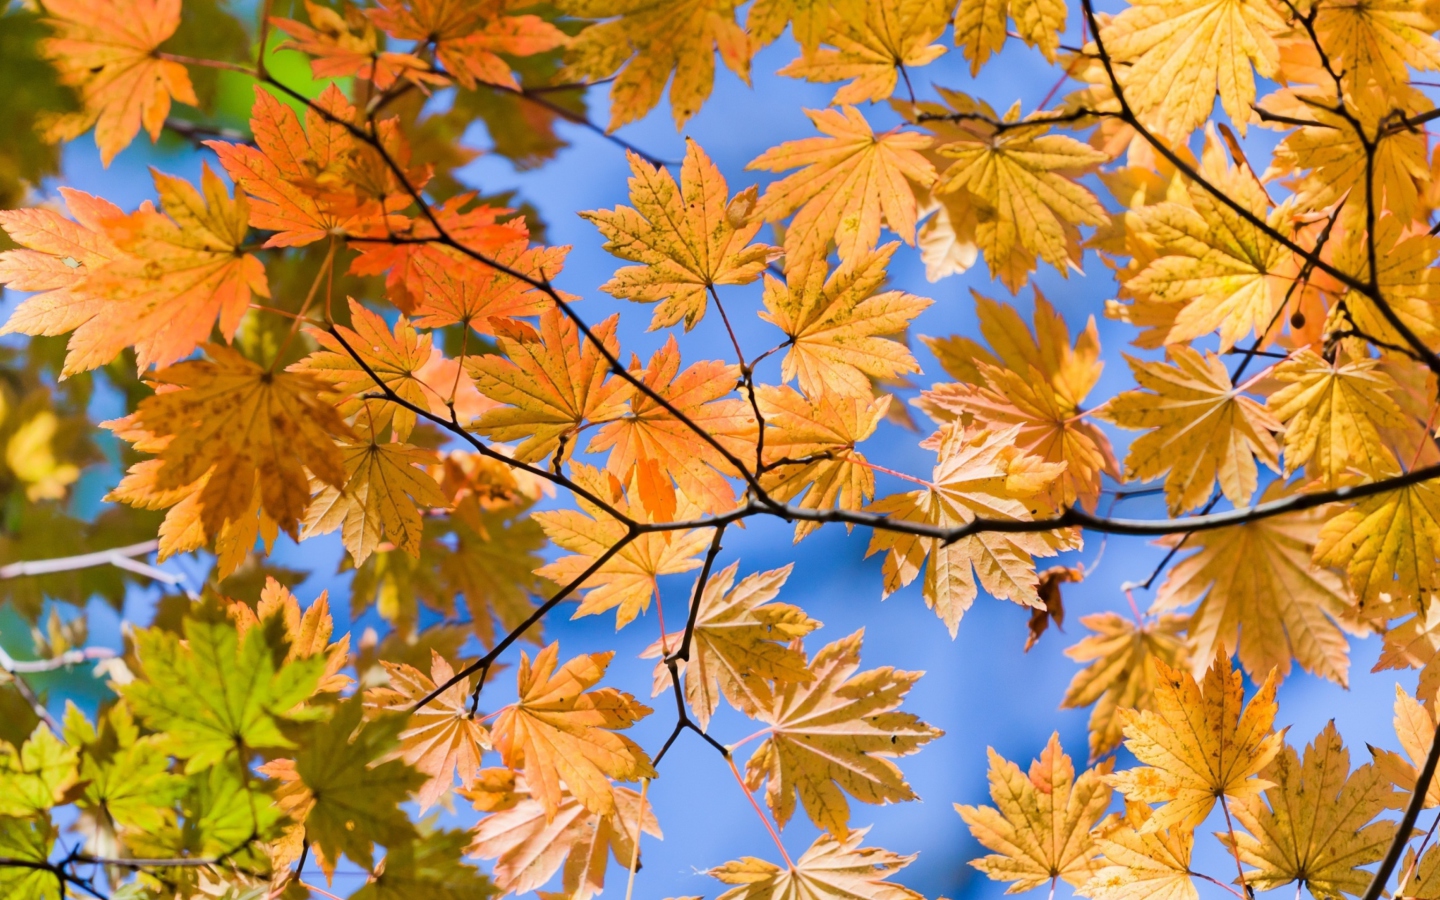 Autumn Leaves And Blue Sky wallpaper 1440x900